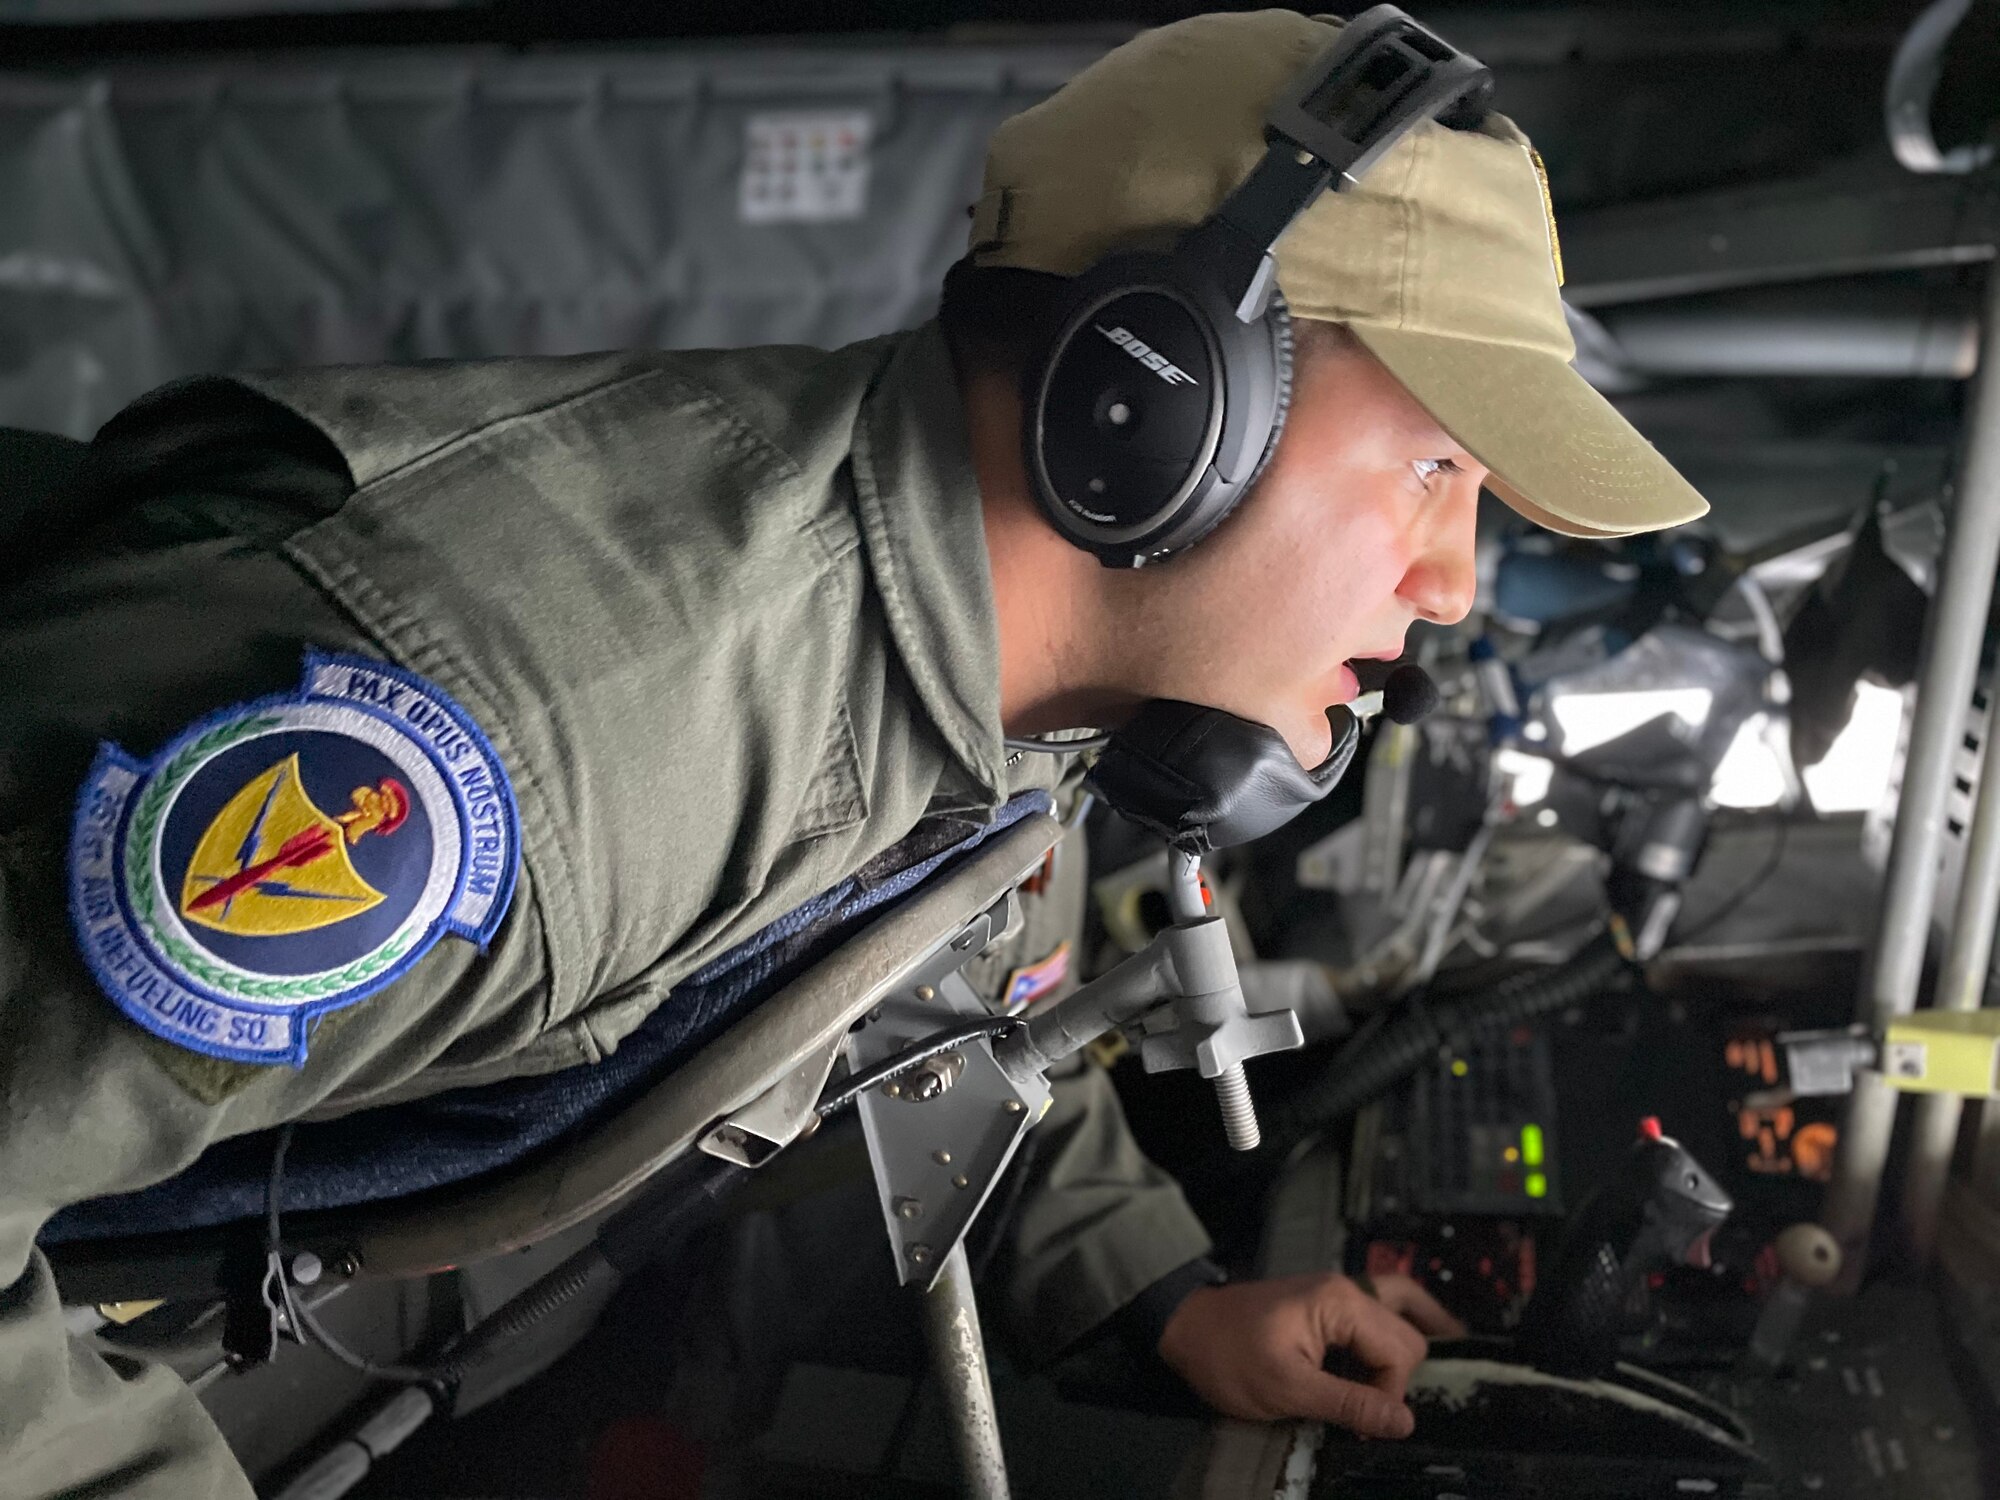 U.S. Air Force Staff Sgt. Juan Morales, 351st Air Refueling Squadron boom operator, refuels a B-1B Lancer aircraft during exercise Castle Forge off the coast of Norway, Nov. 1, 2021. Exercising elements of Agile Combat Employment enables U.S. forces in Europe to operate from locations with varying levels of capacity and support, ensuring Airmen and aircrews are postured to deliver lethal combat power across the spectrum of military operations. Alongside F-15 operations in the Black Sea Region, Castle Forge encompasses the USAFE MAJCOM-wide Agile Combat Employment Initial Operating Capability capstone event. Both Castle Forge’s components will better enable forces to quickly disperse and continue to deliver air power from locations with varying levels of capacity and support, ensuring Airmen are always ready to respond to potential threats. (U.S. Air Force photo by Senior Airman Joseph Barron)